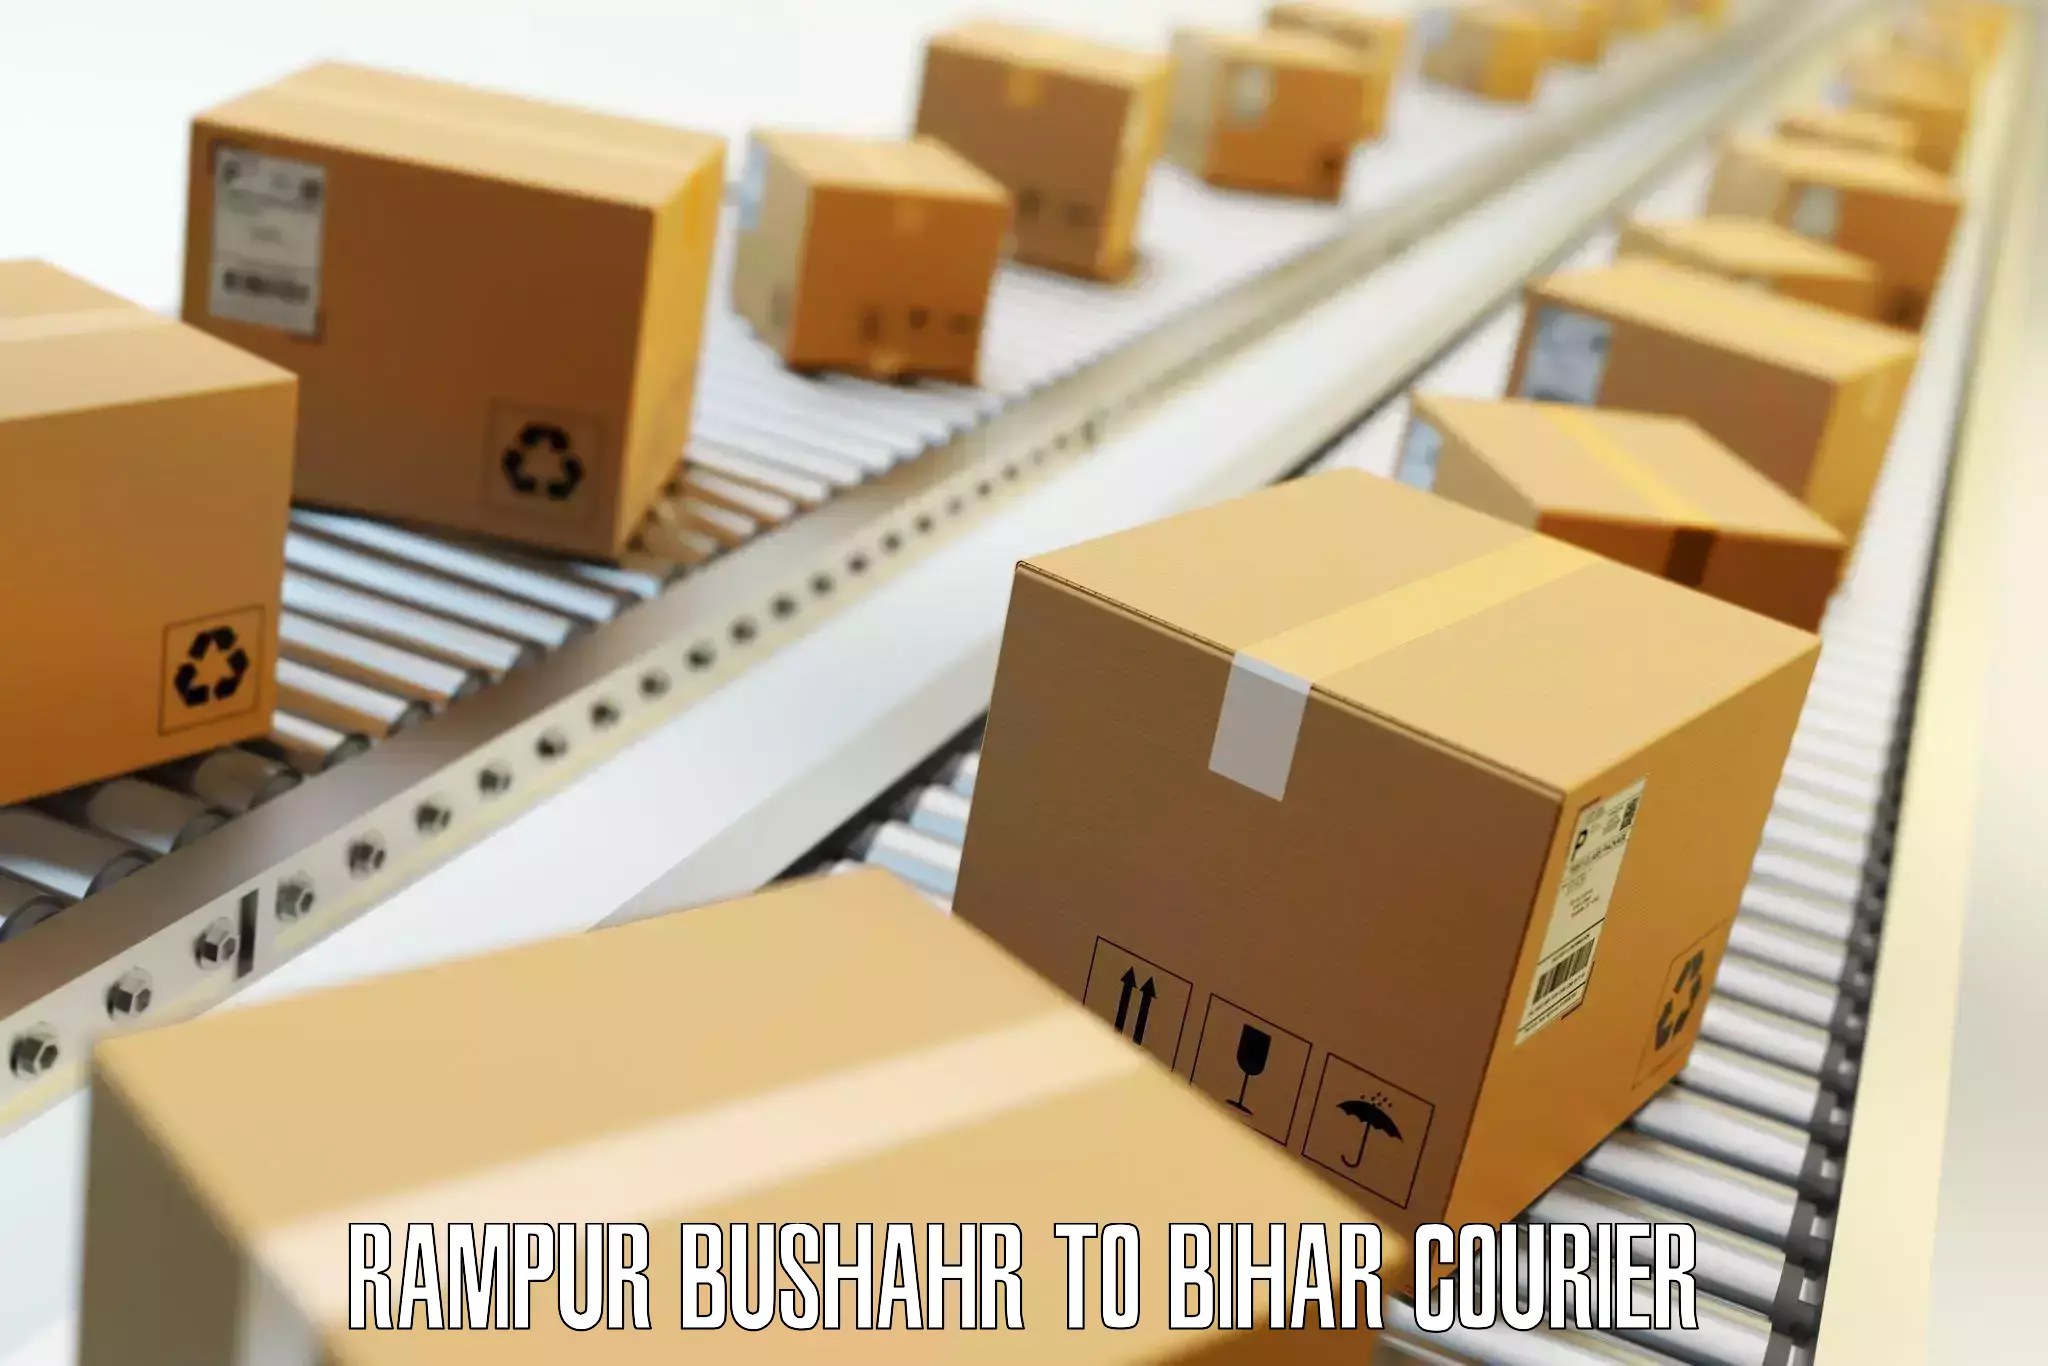 Luggage transport guidelines Rampur Bushahr to Arwal